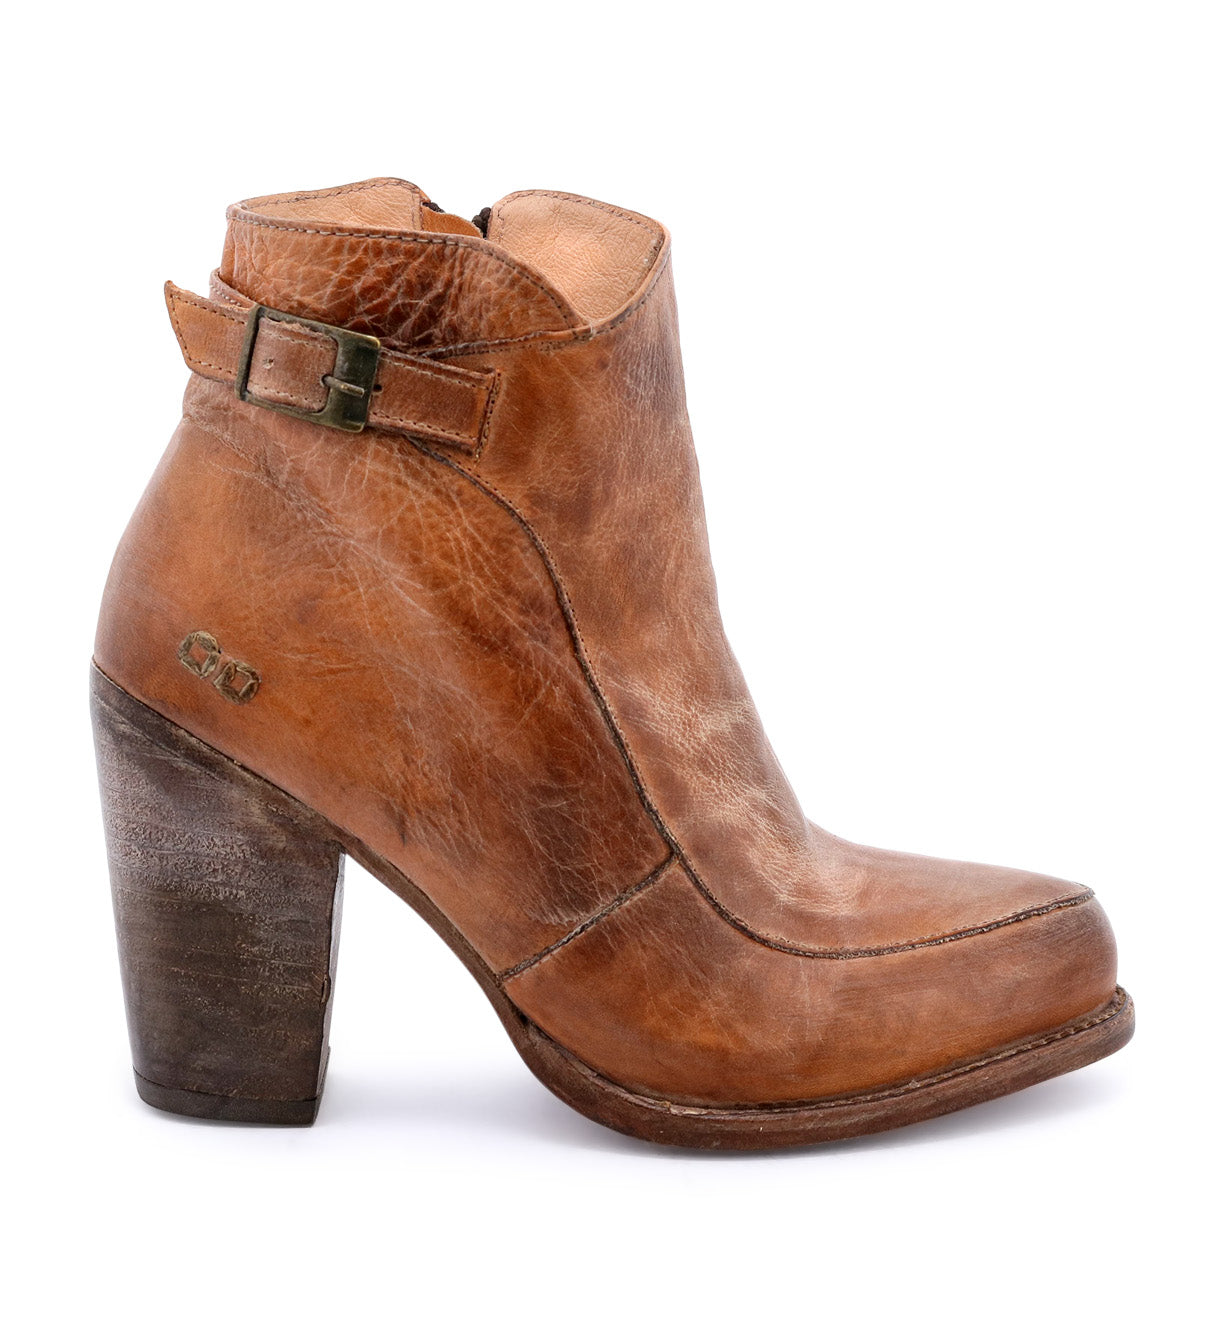 A women's brown ankle boot named Isla by Bed Stu with a wooden heel.